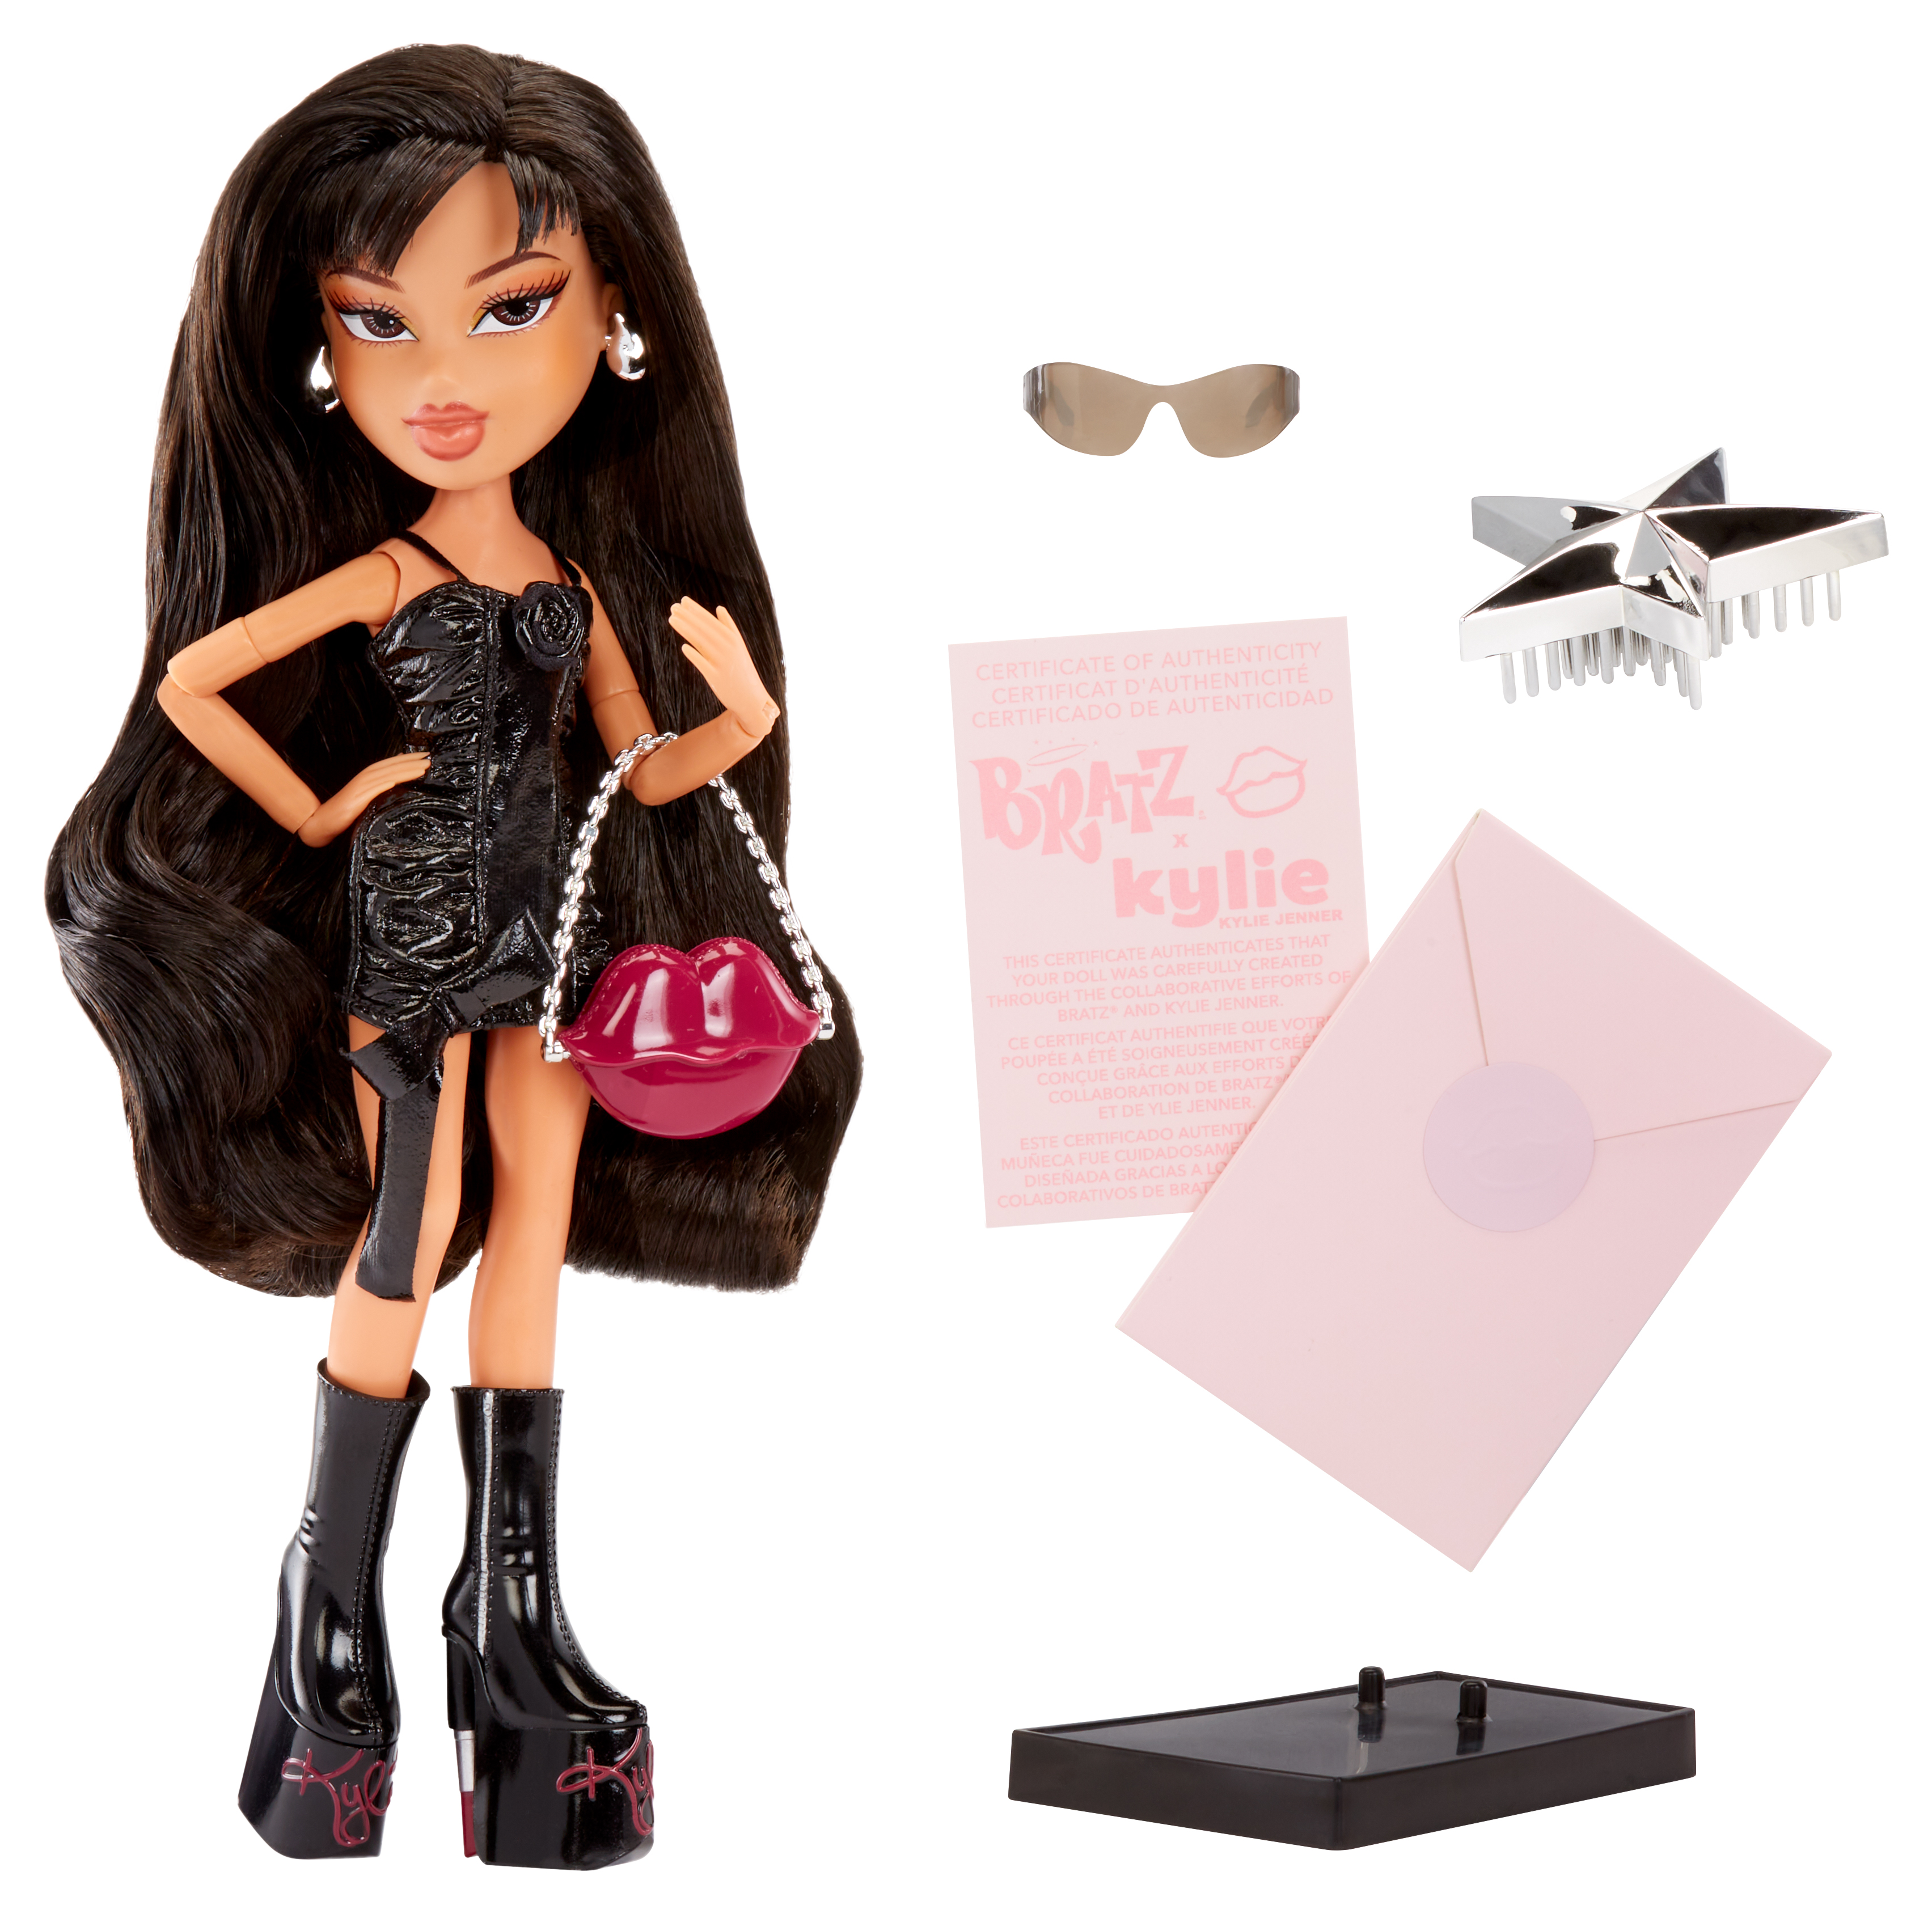 Kylie Jenner's Bratz Collaboration Honors Her Most Iconic Outfits